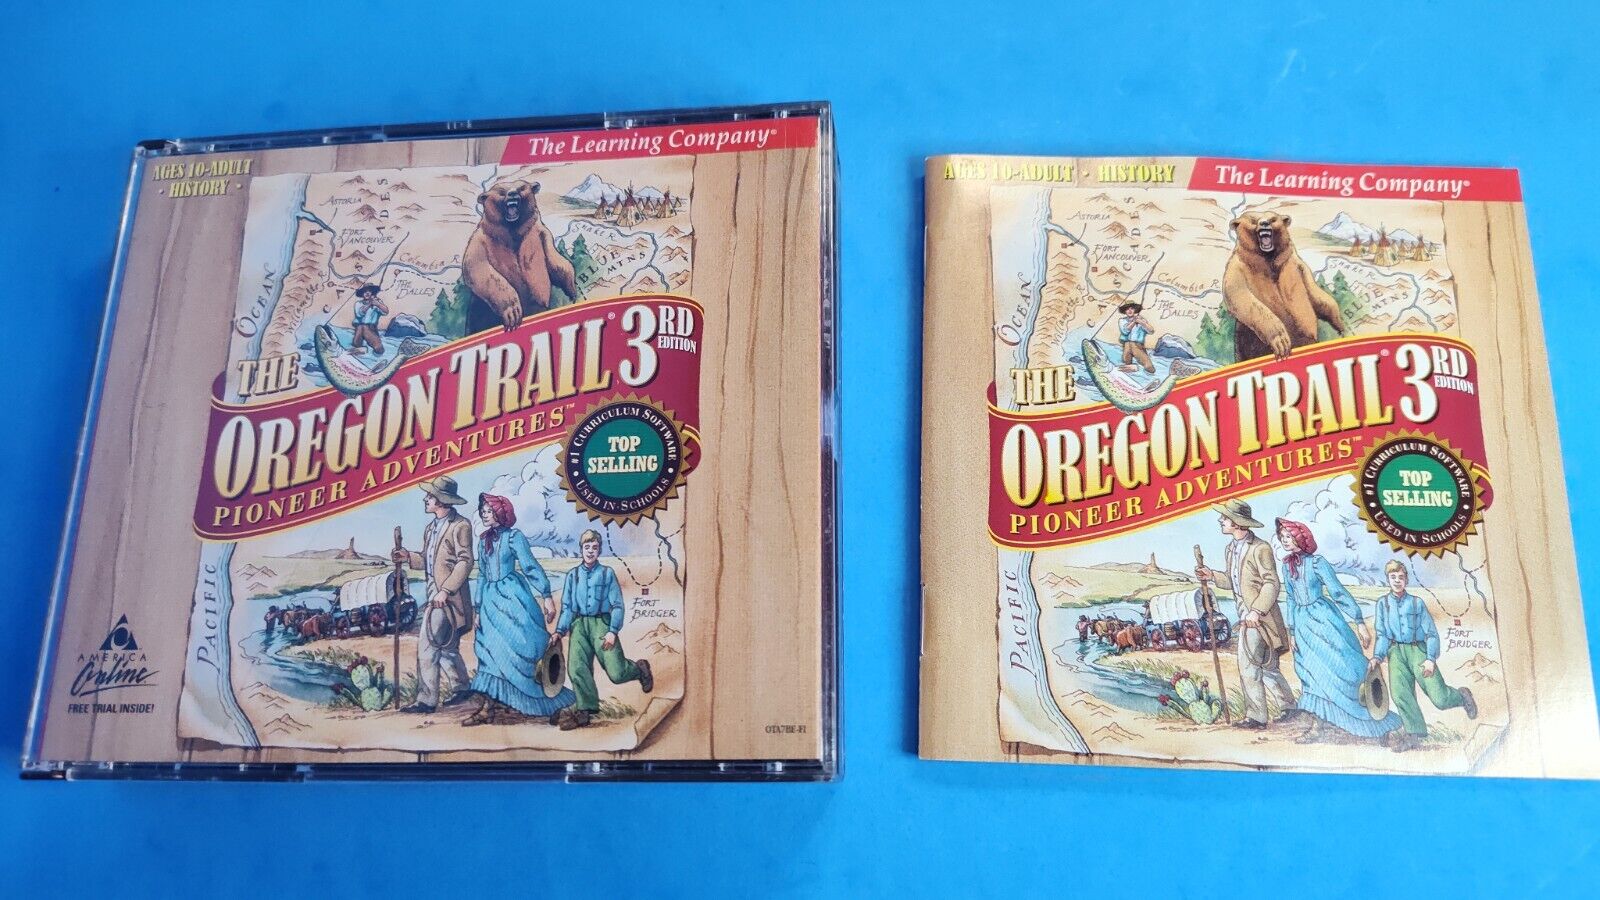 The Oregon Trail 3rd Edition: Pioneer Adventures Education Game 3CD Set w/Manual